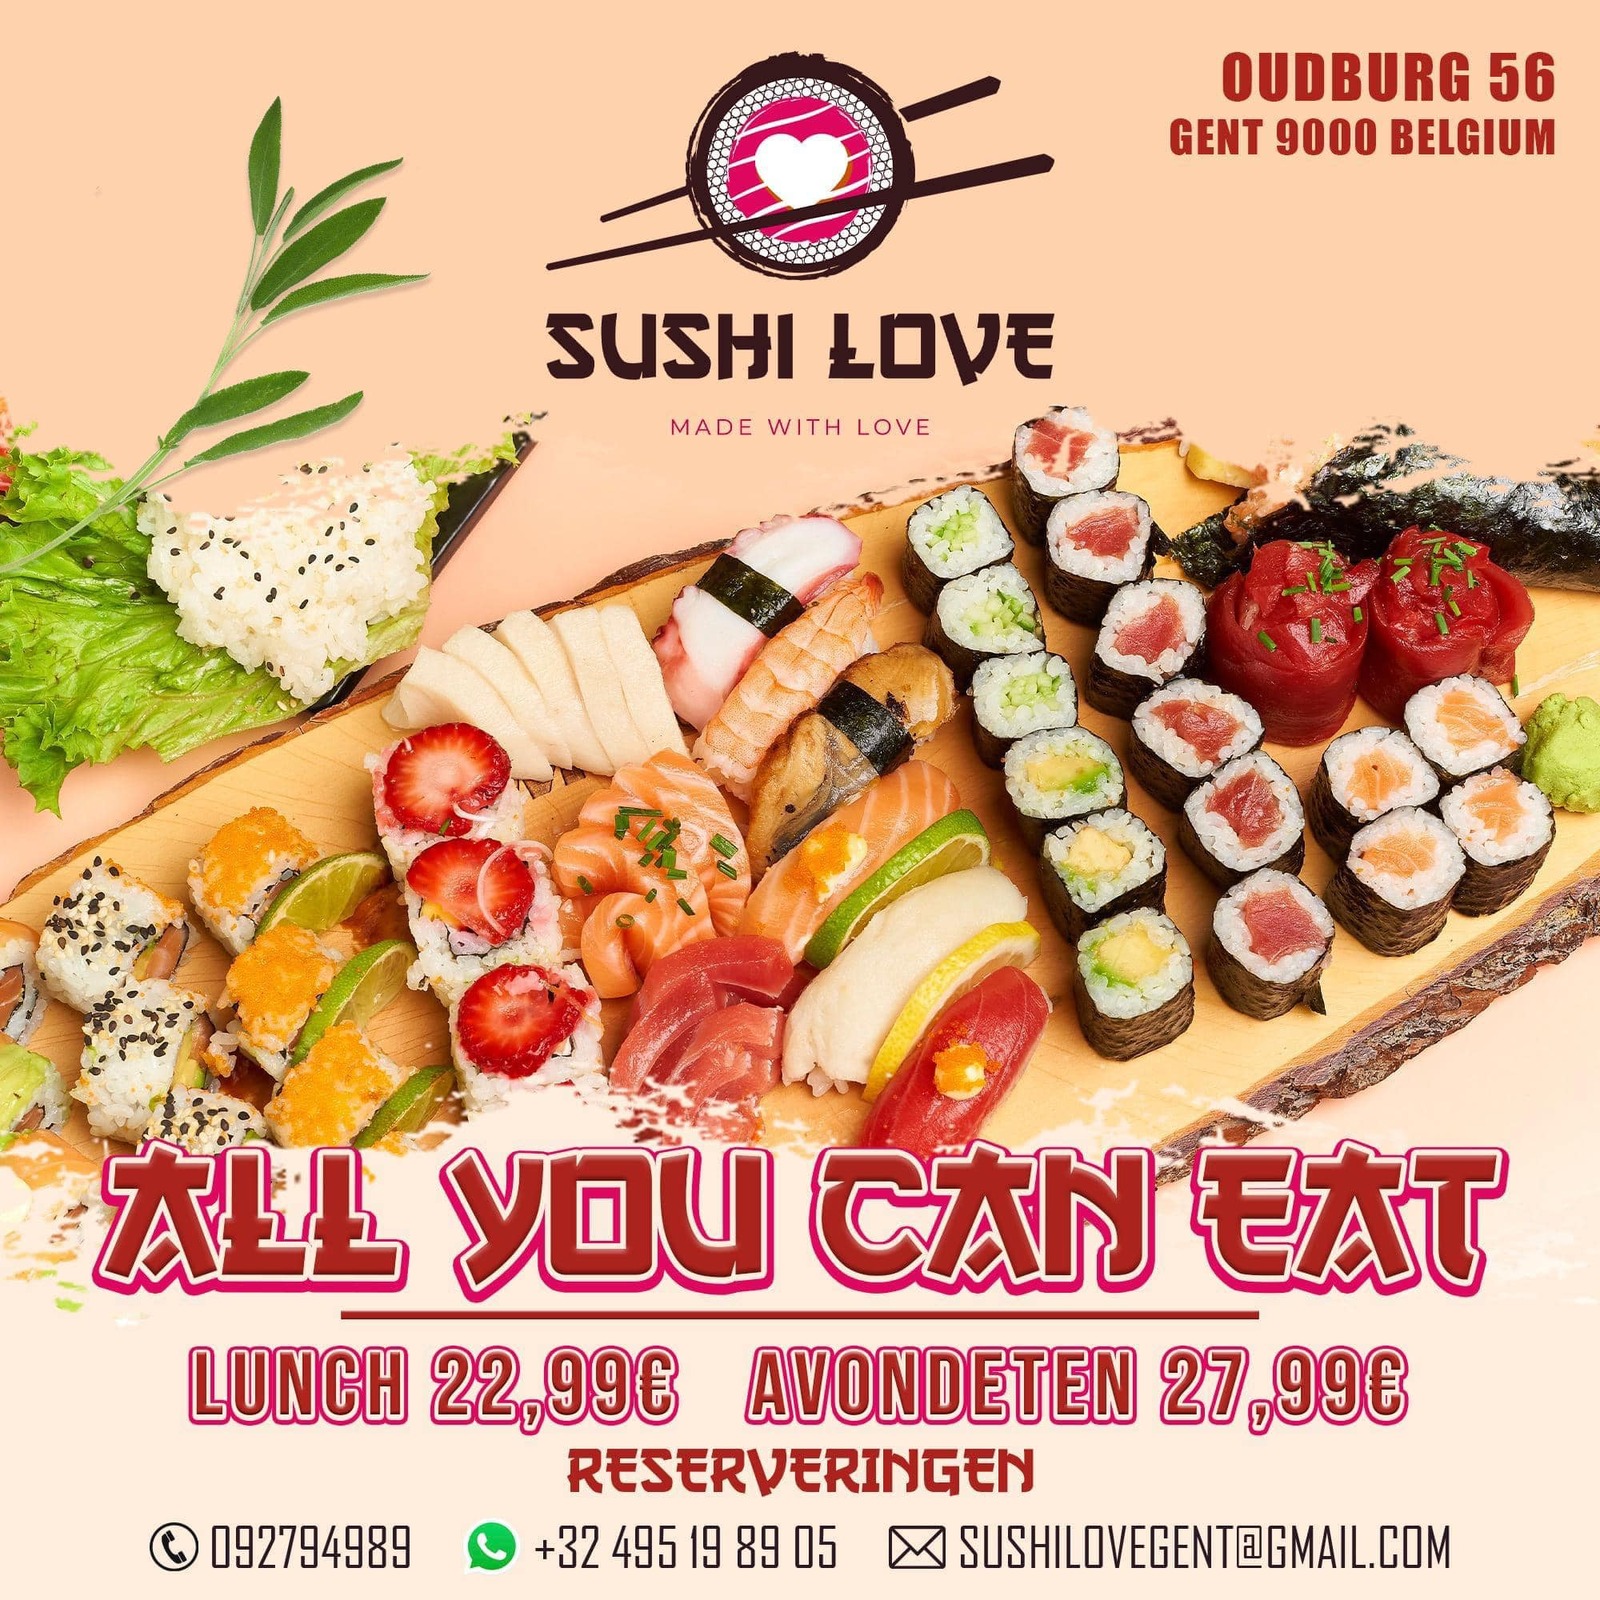 Book Your Sushi Love Reservation Now on Resy